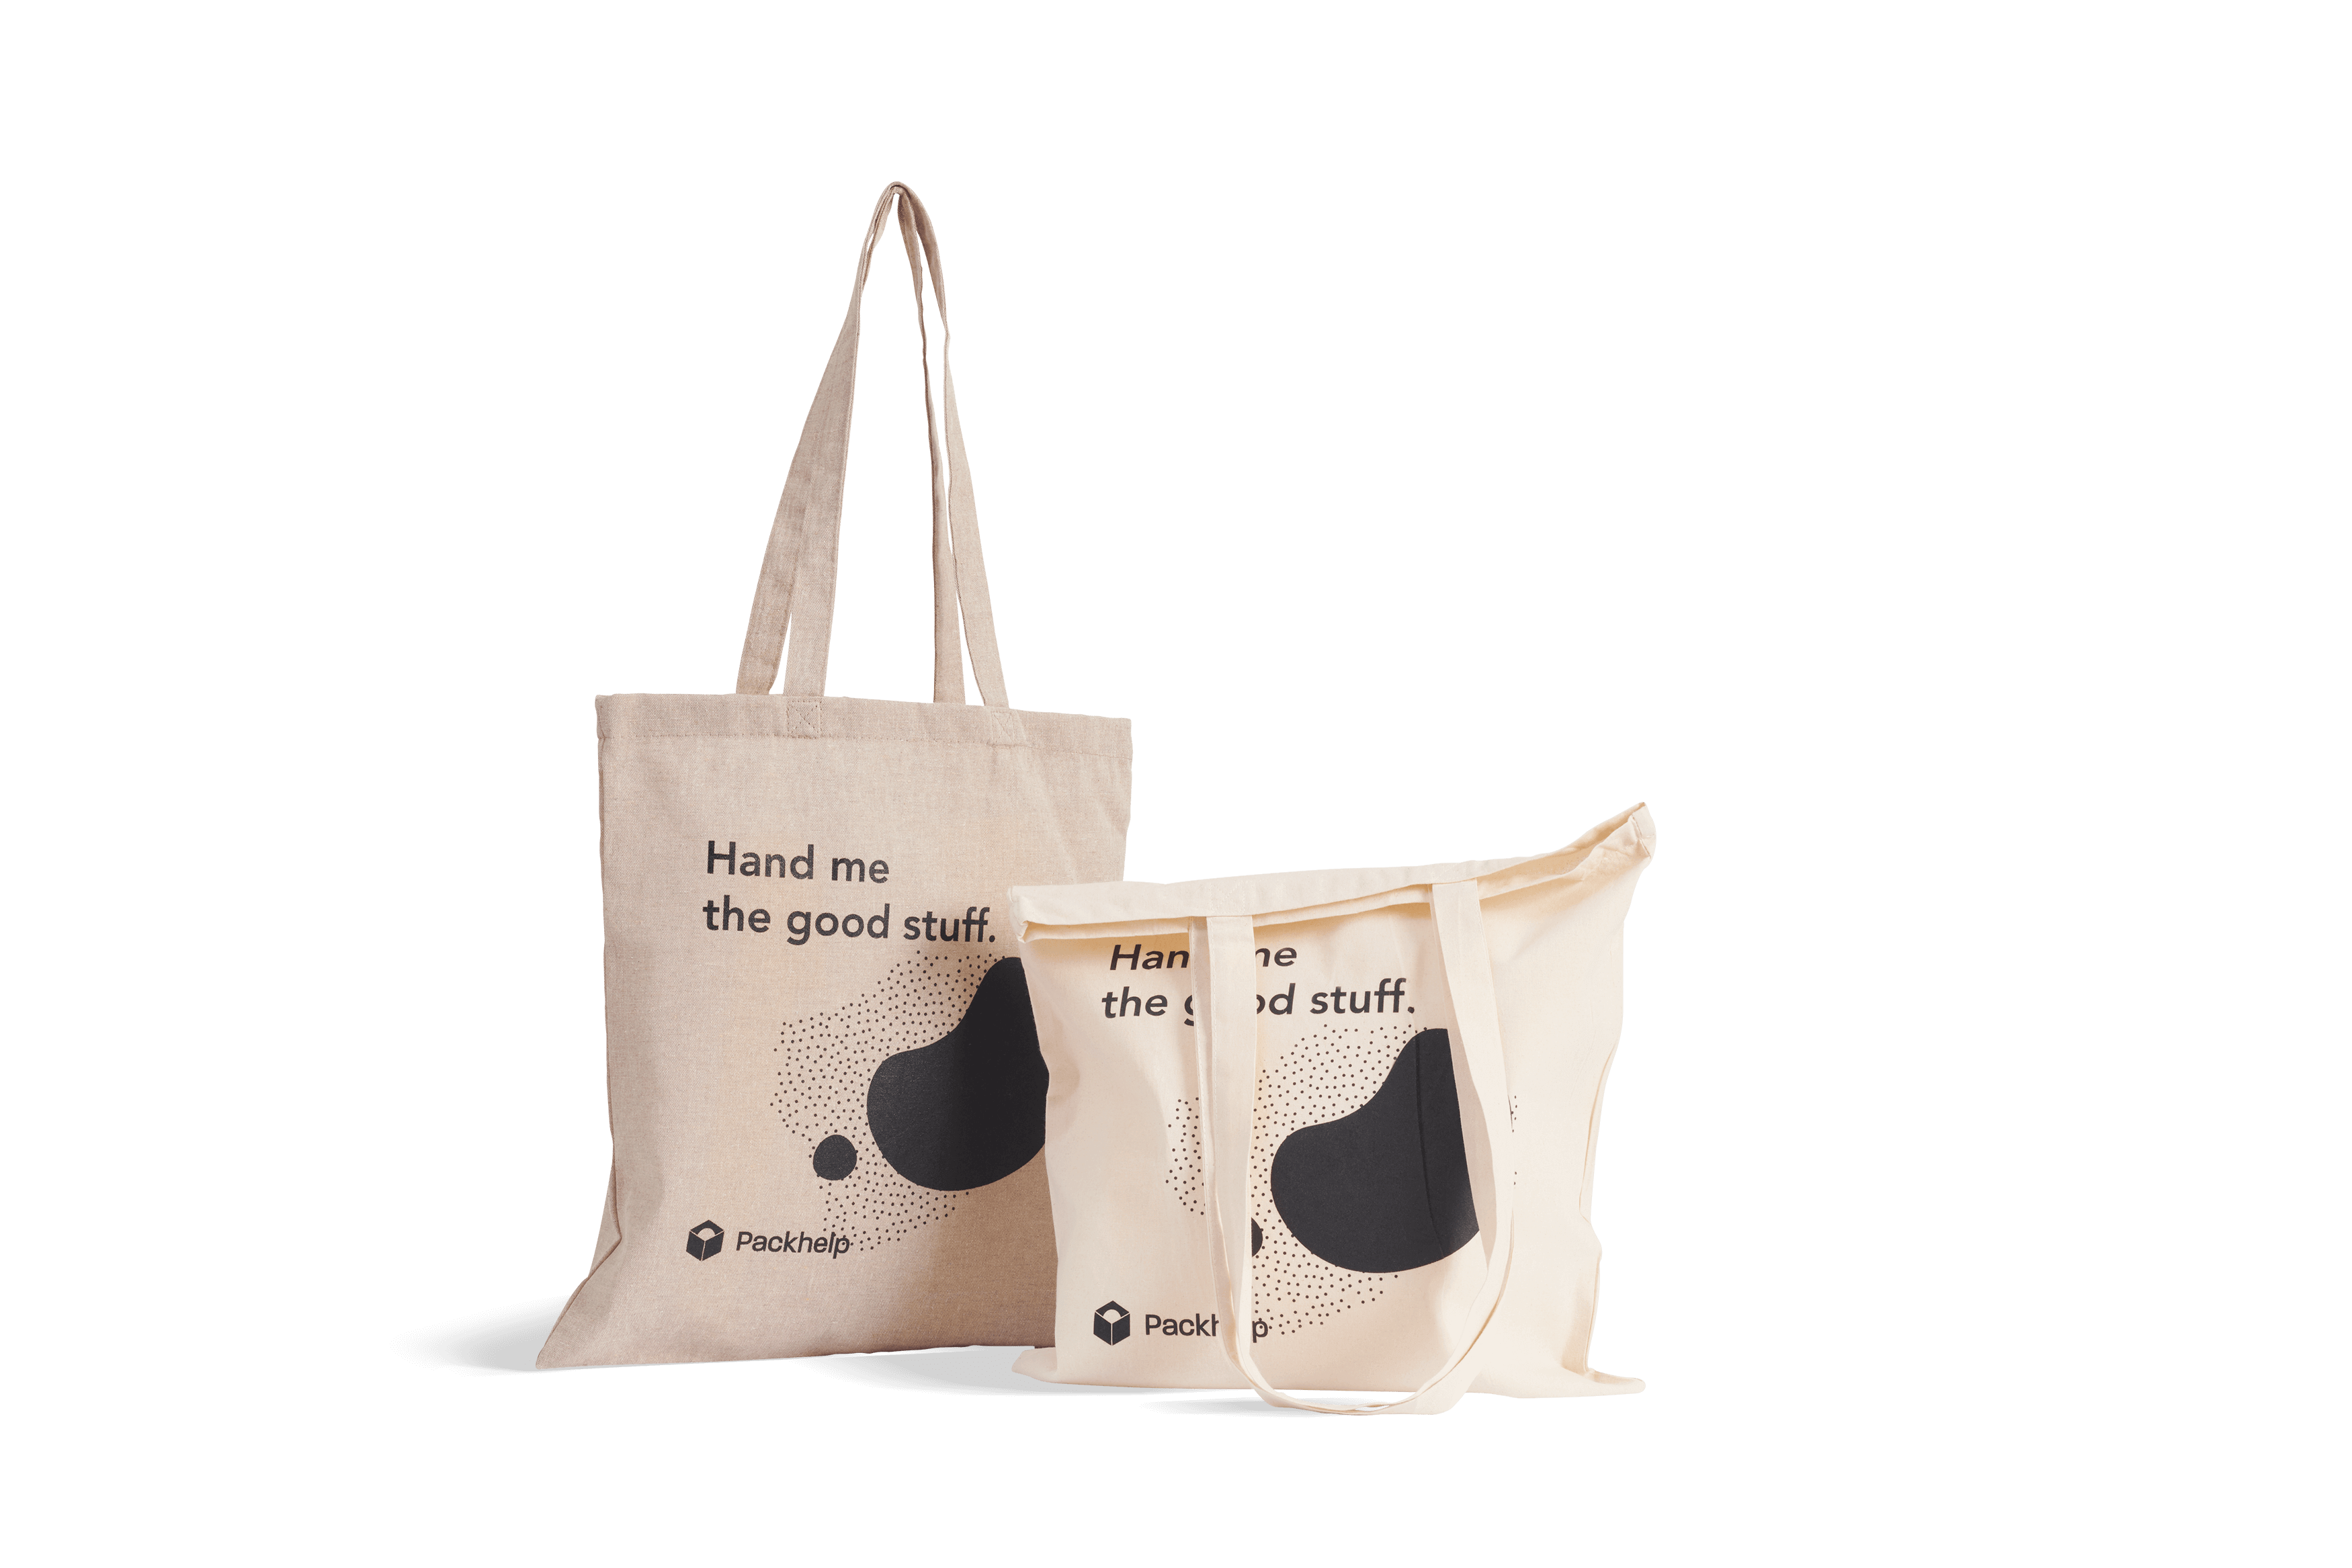 Tote bag for women organic cotton personalized designs. excellent quality